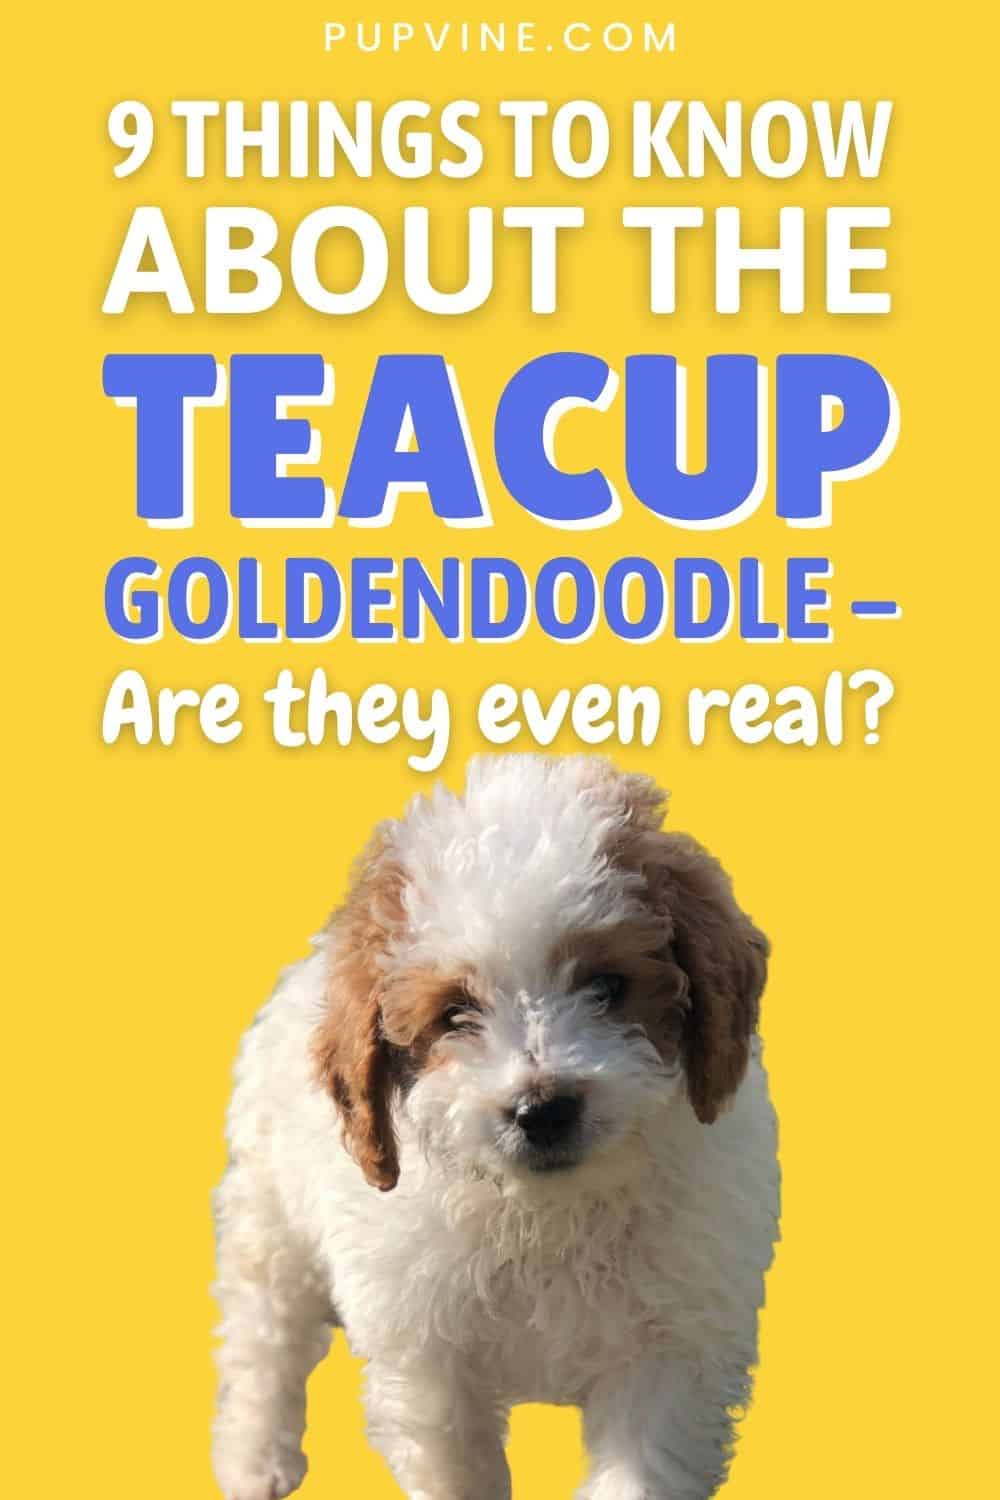 9 Things to Know About A Teacup Goldendoodle – Are They Even Real?